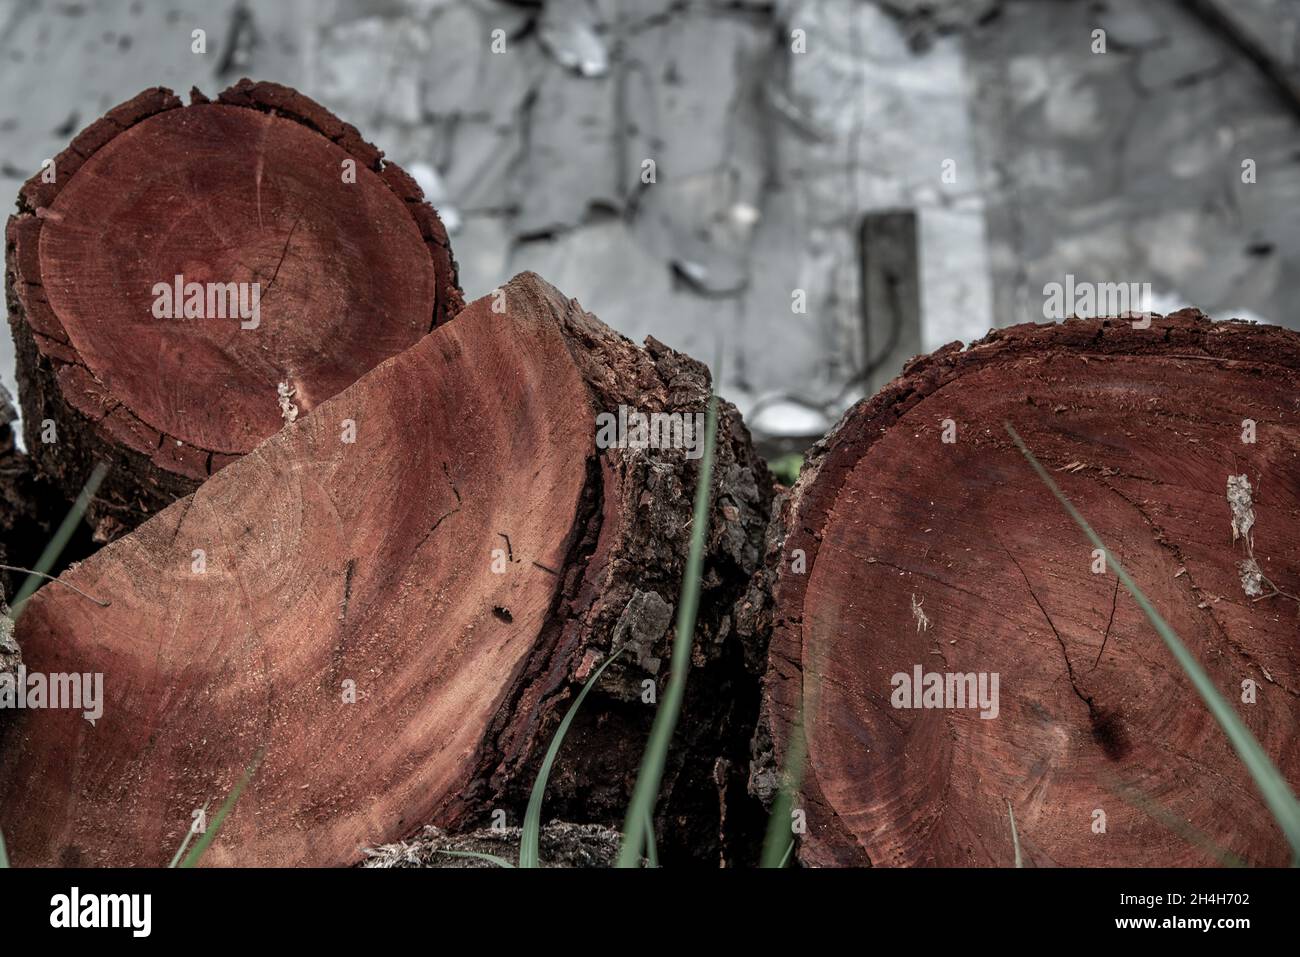 Stack of  Xylia xylocarpa Taub (Leguminosae) stumps ready for use in construction, Wooden natural cut logs textured background. Stock Photo